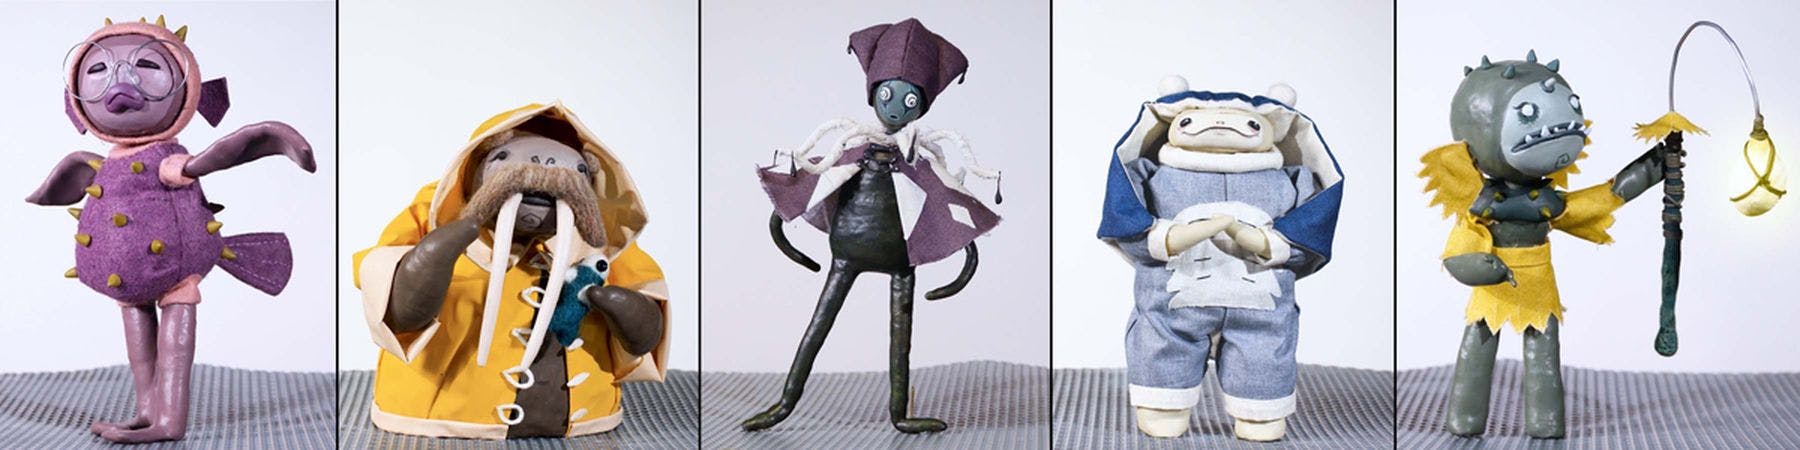 A collage of five models of anthropomorphic sea creatures creatures, all wearing clothes.